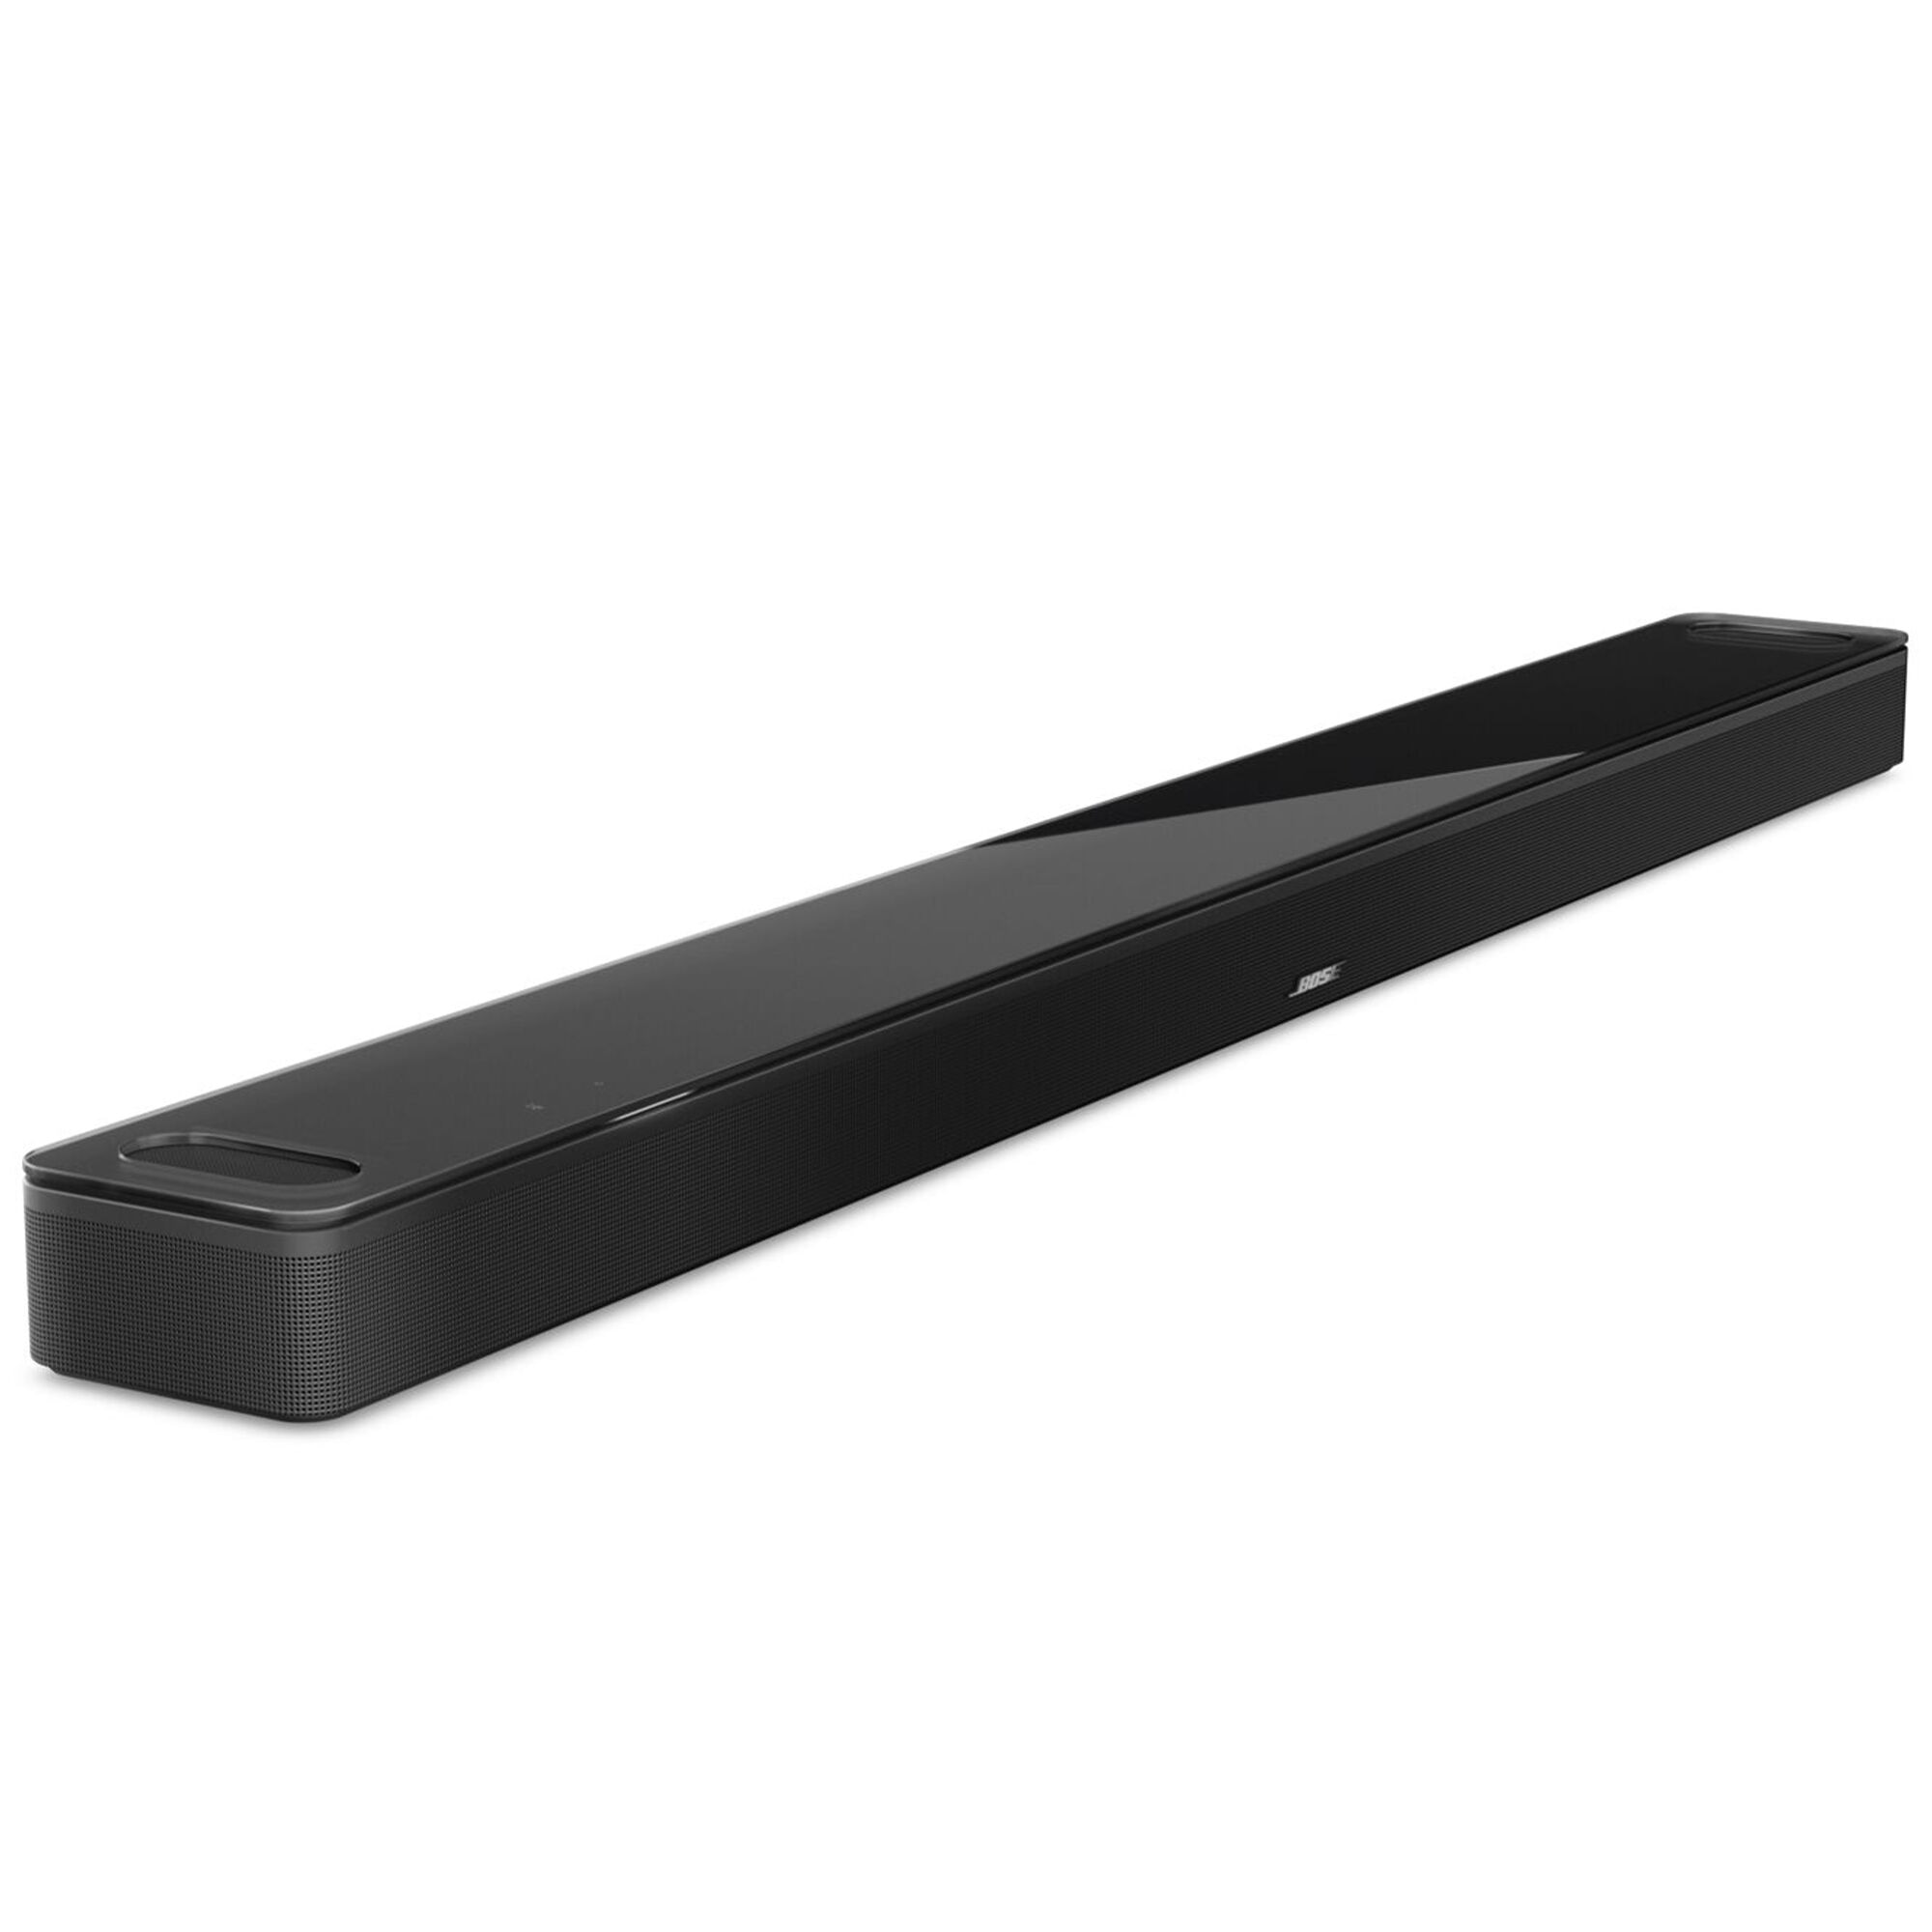 Bose - Smart Soundbar 900 with Dolby Atmos and Voice Assistant